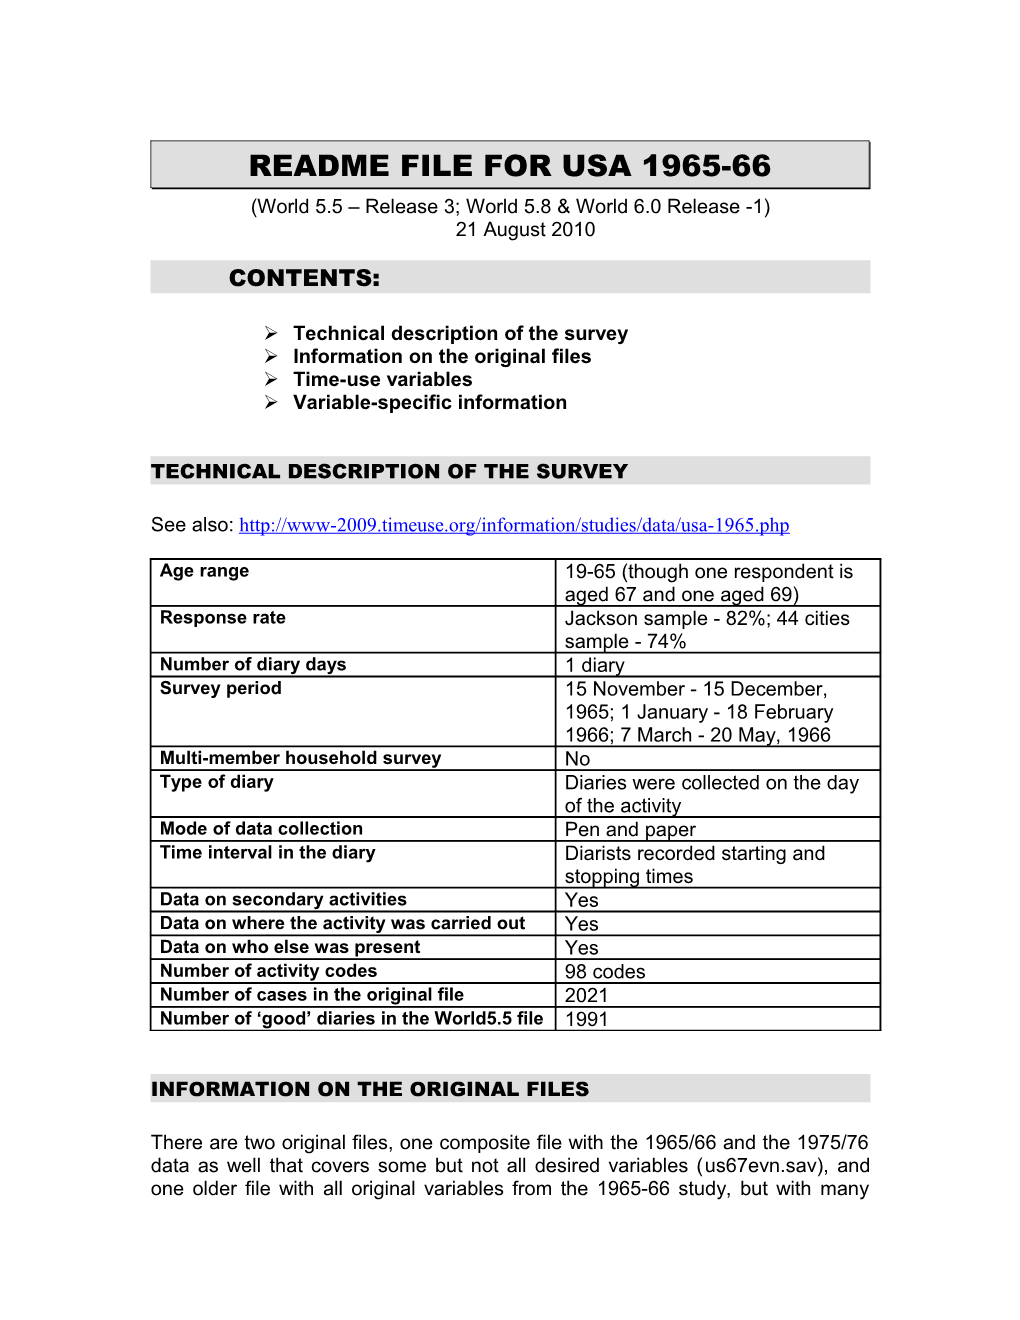 Readme File for USA 1965-66